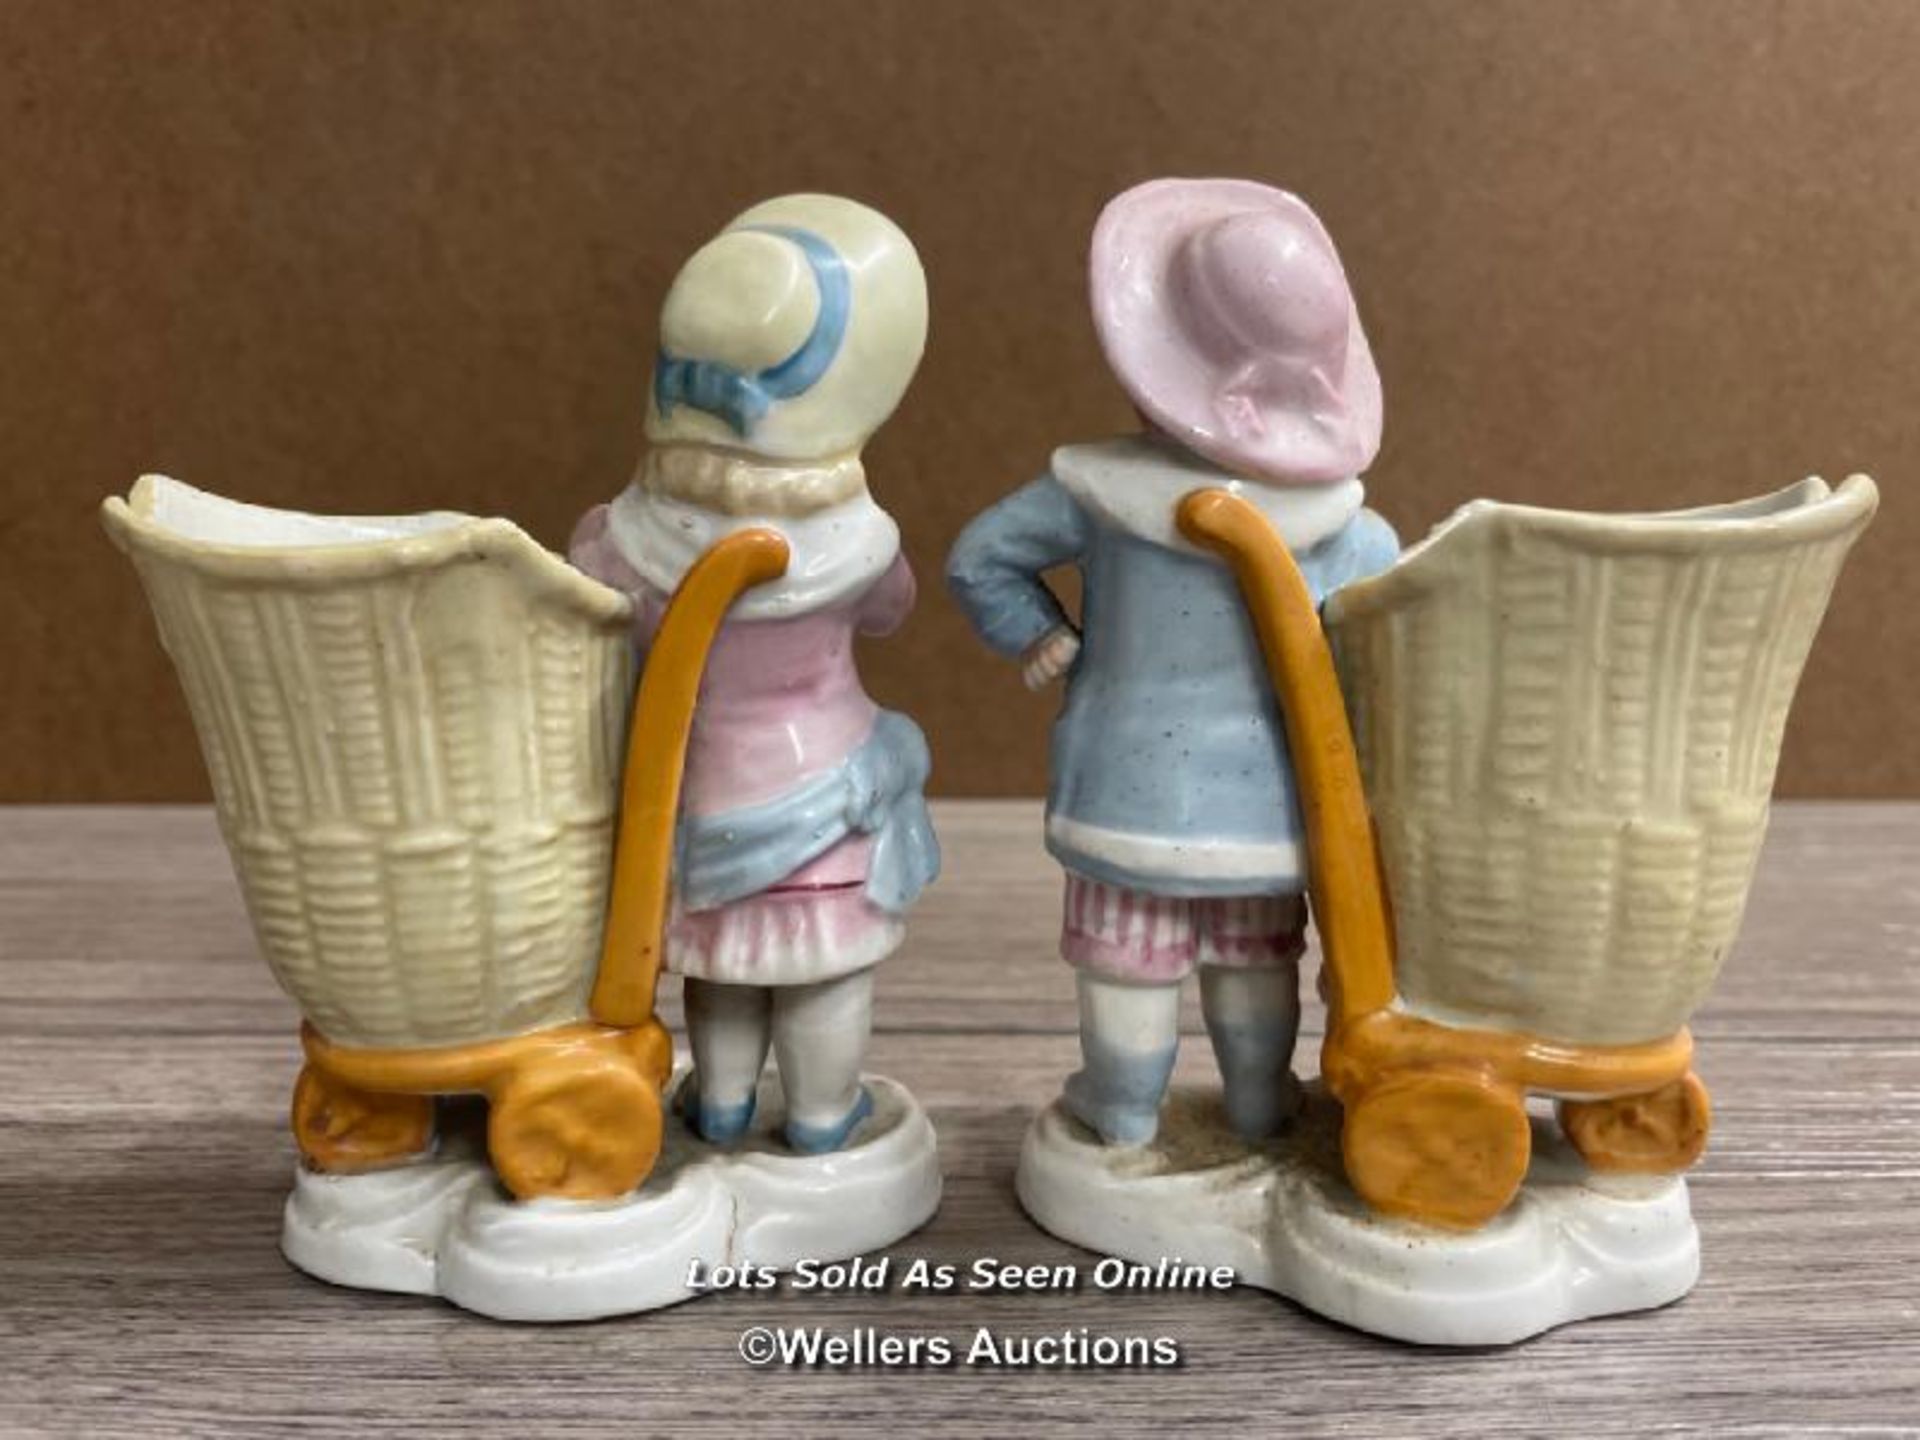 A PAIR OF VICTORIAN SPILL VASES MODELLED AS CHILDREN WITH BASKETS - Image 2 of 3